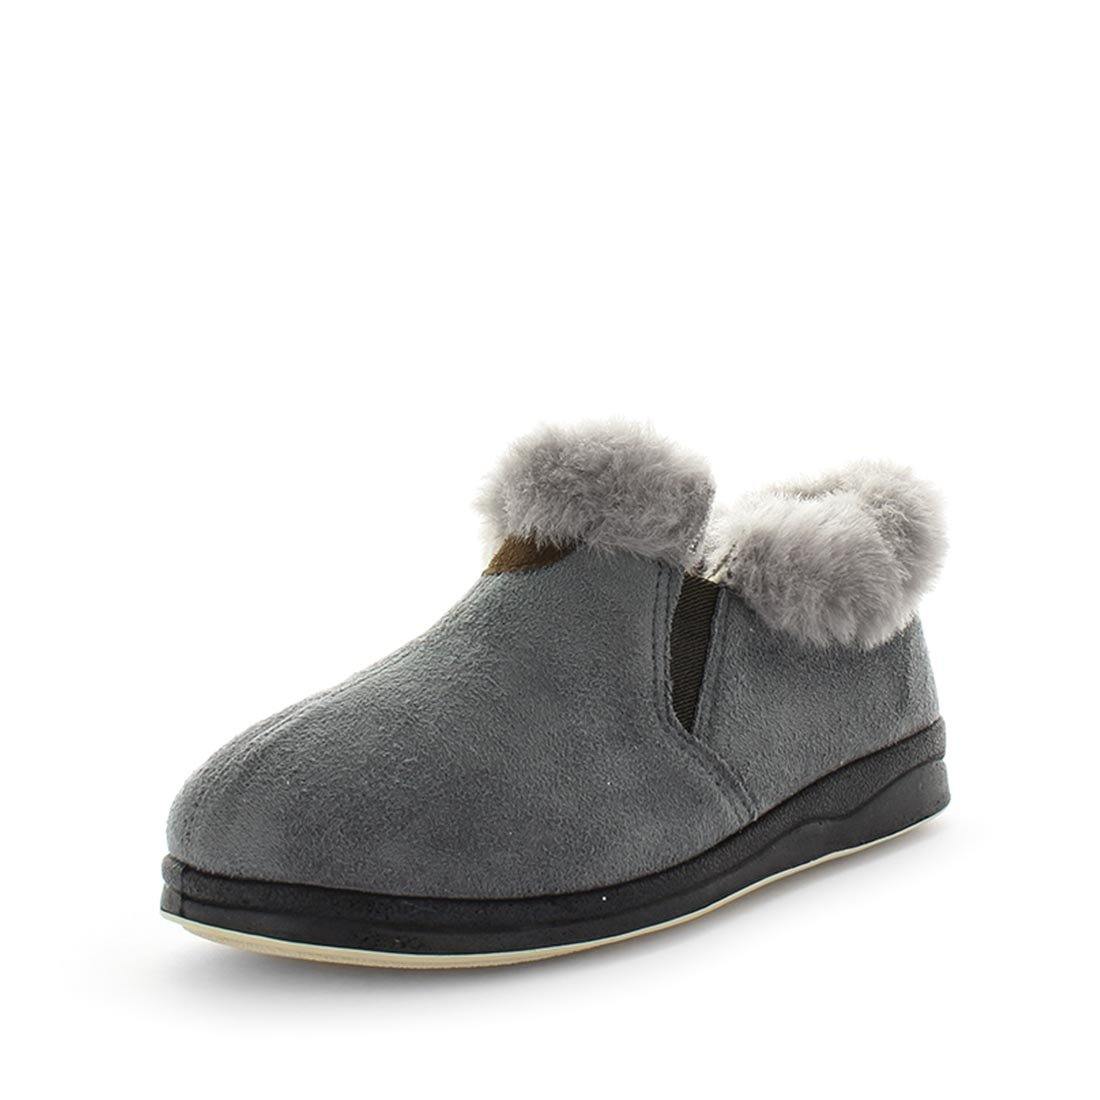 Load image into Gallery viewer, Elivia by panda slippers  - comfort slippers - women&amp;#39;s slippers - boot style slippers - slipper boots - fur collar and fur lining slipper with warm and comfy fit and twin gussets for easy slip on and off
